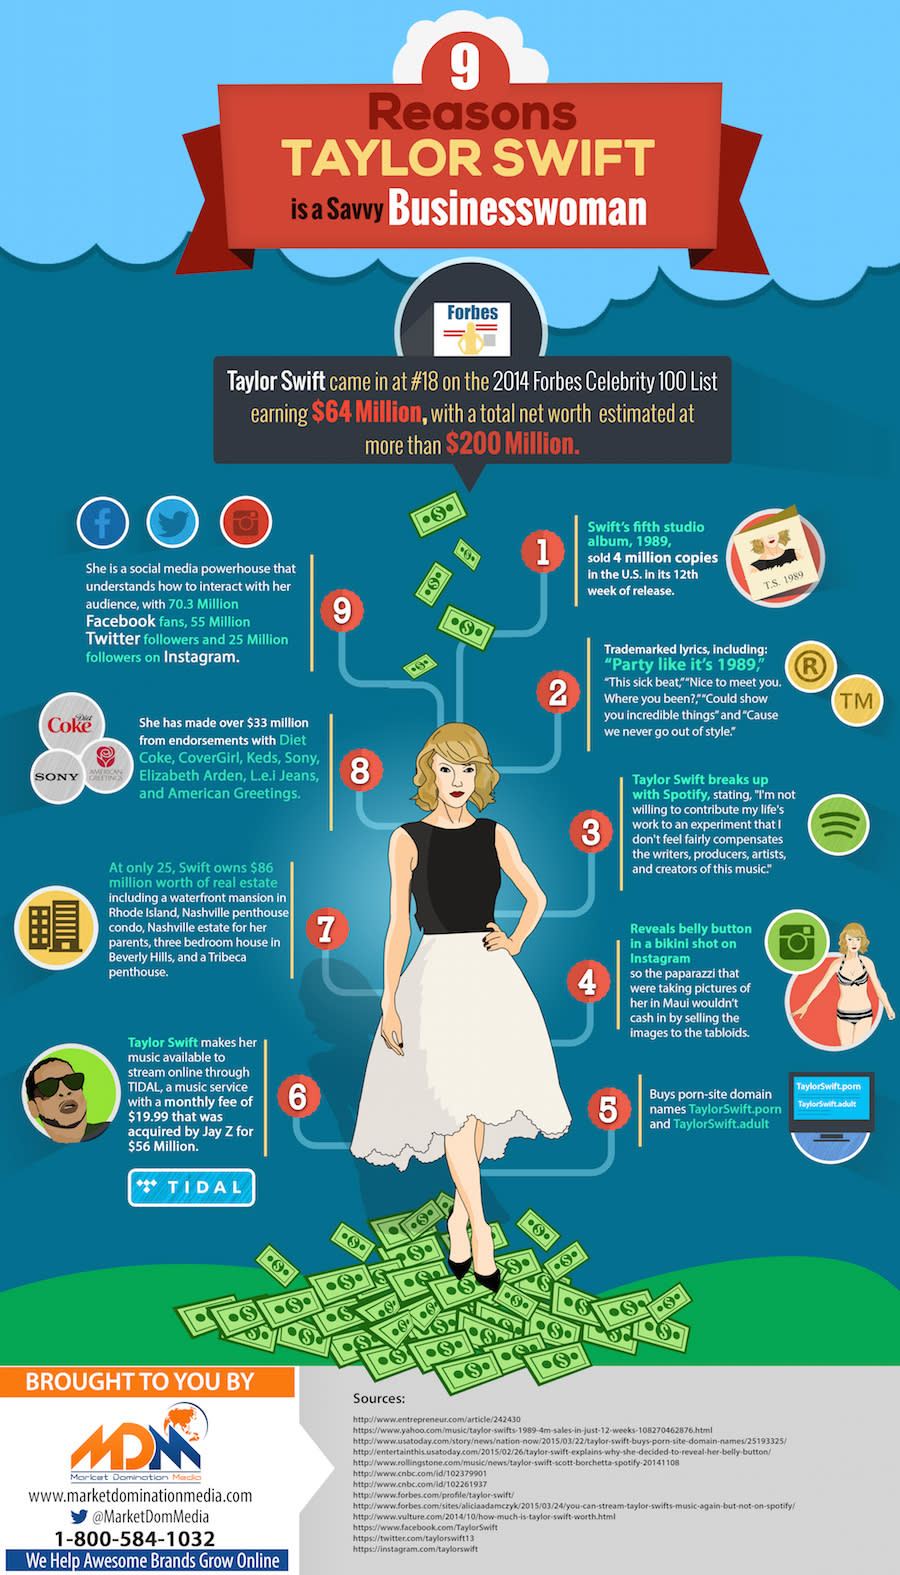 9 Reasons Taylor Swift Is a Savvy Business Leader (Infographic)